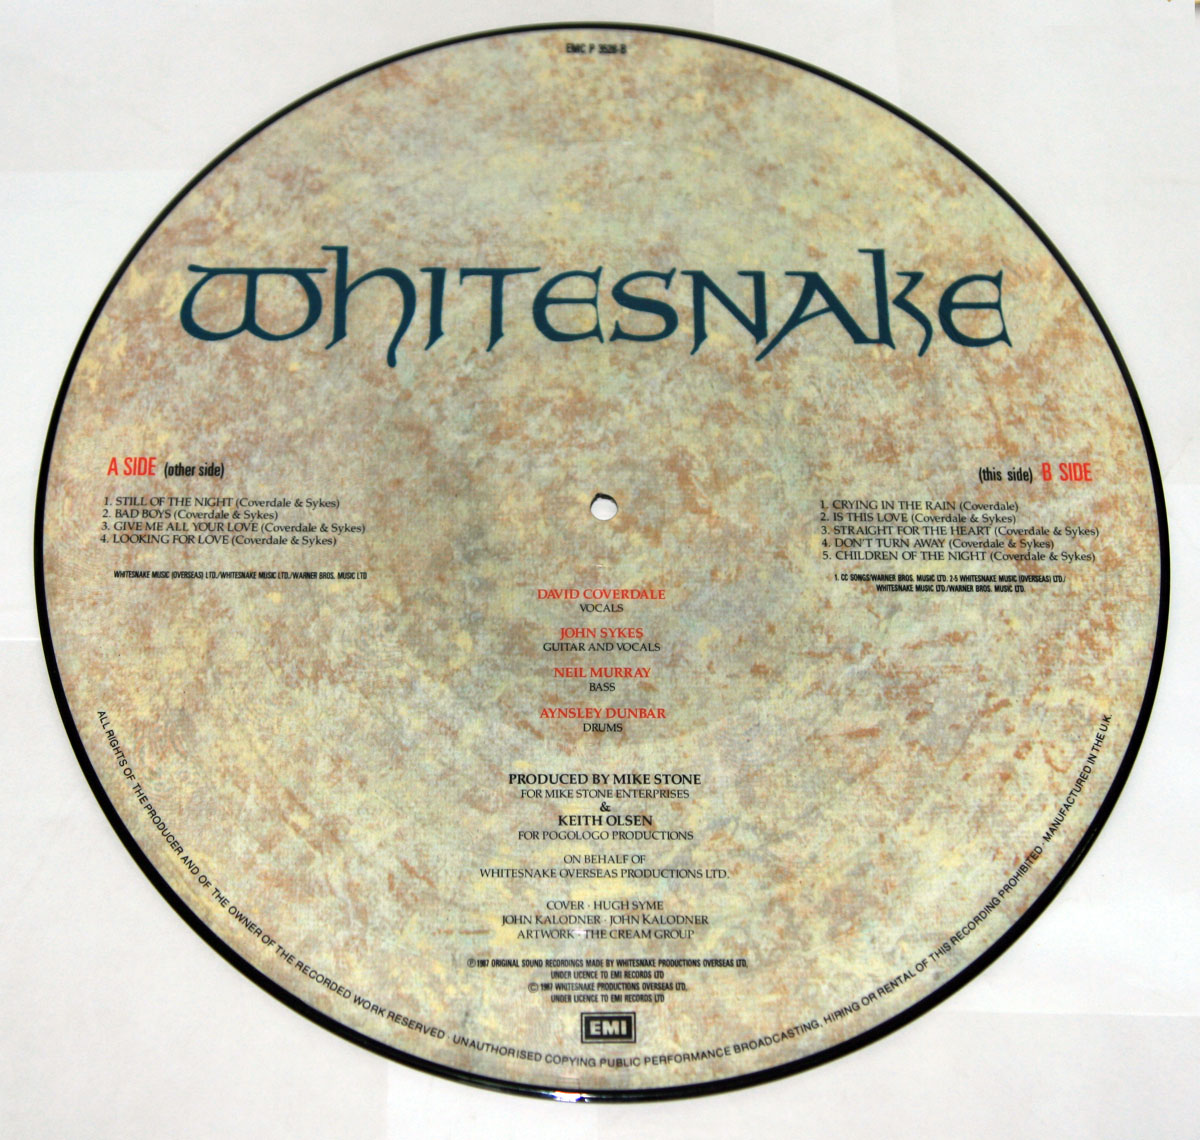 High Resolution Photos of whitesnake picture disc pd 